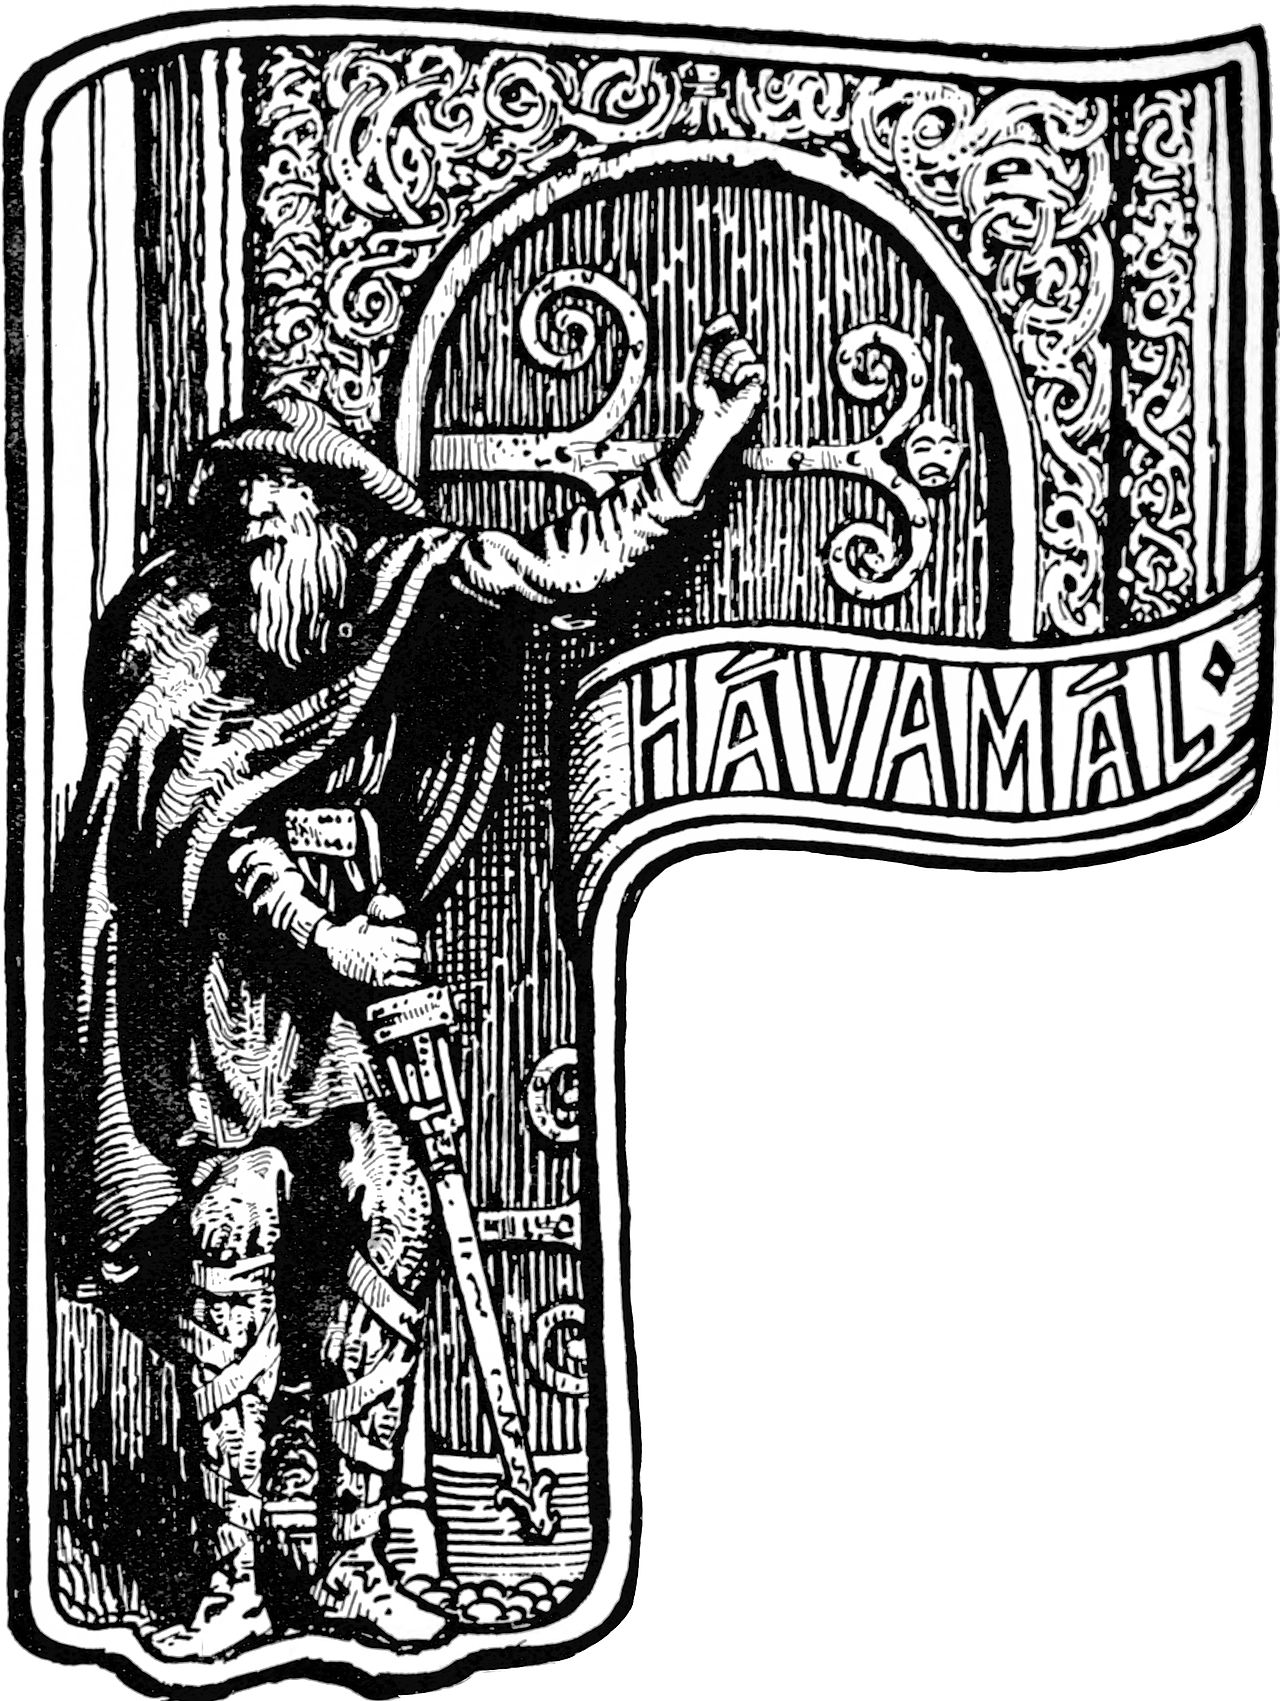 Today from Havamal